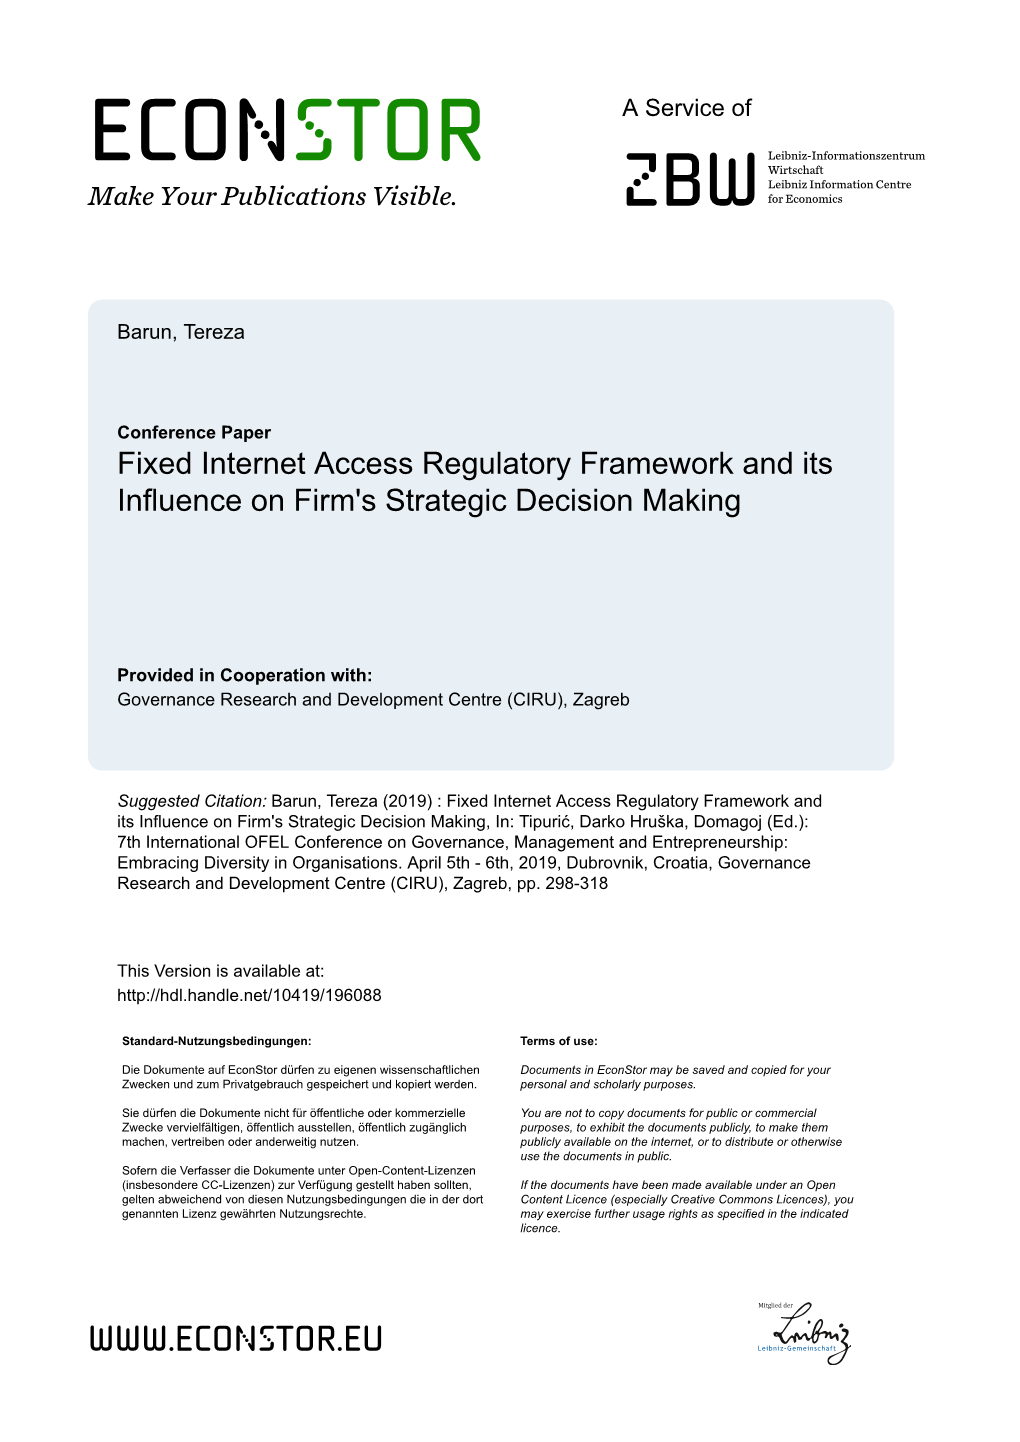 Fixed Internet Access Regulatory Framework and Its Influence on Firm's Strategic Decision Making